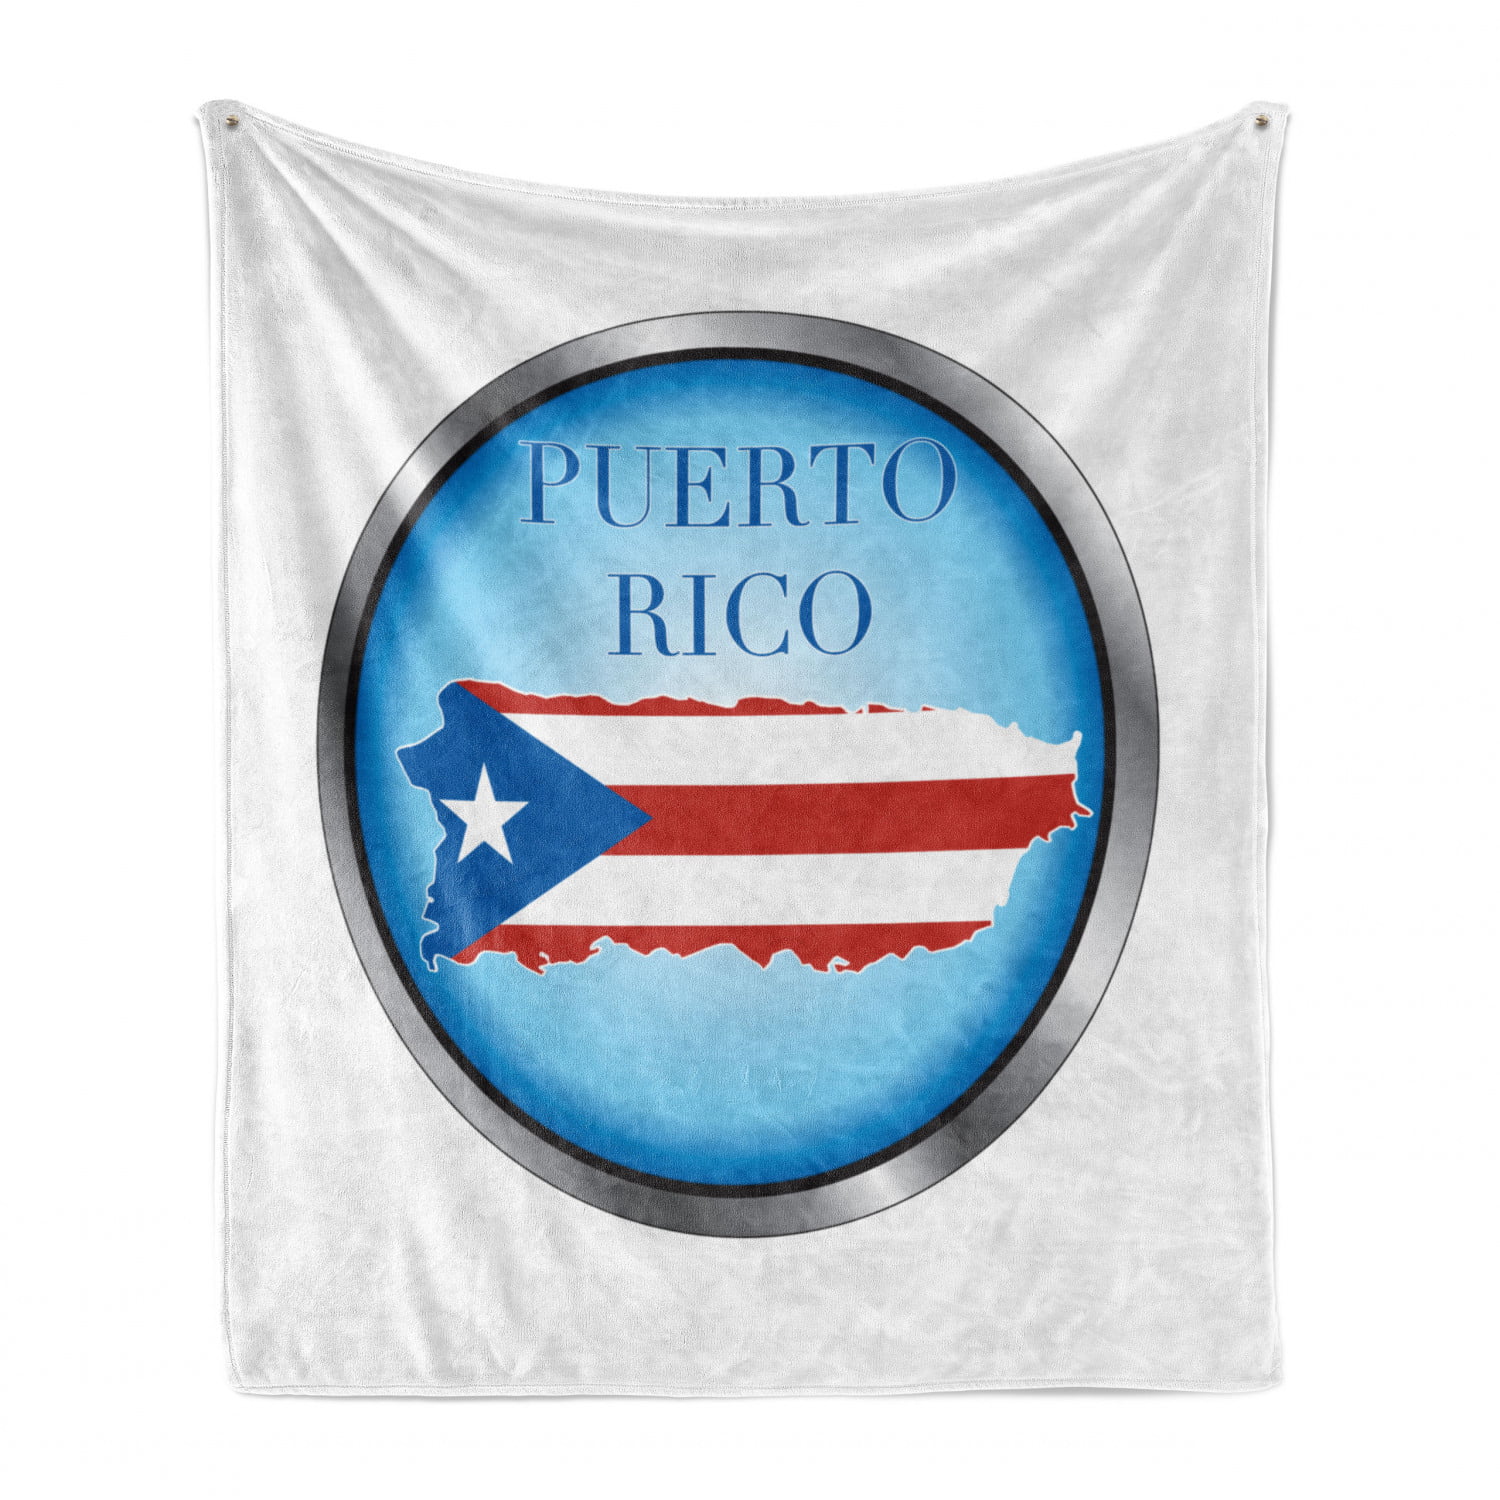 Dark Coral Azure Blue Ambesonne Puerto Rico Soft Flannel Fleece Throw Blanket Sketch Hand-Drawn Style National Country Flag with Grunge Look Cozy Plush for Indoor and Outdoor Use 60 x 80 